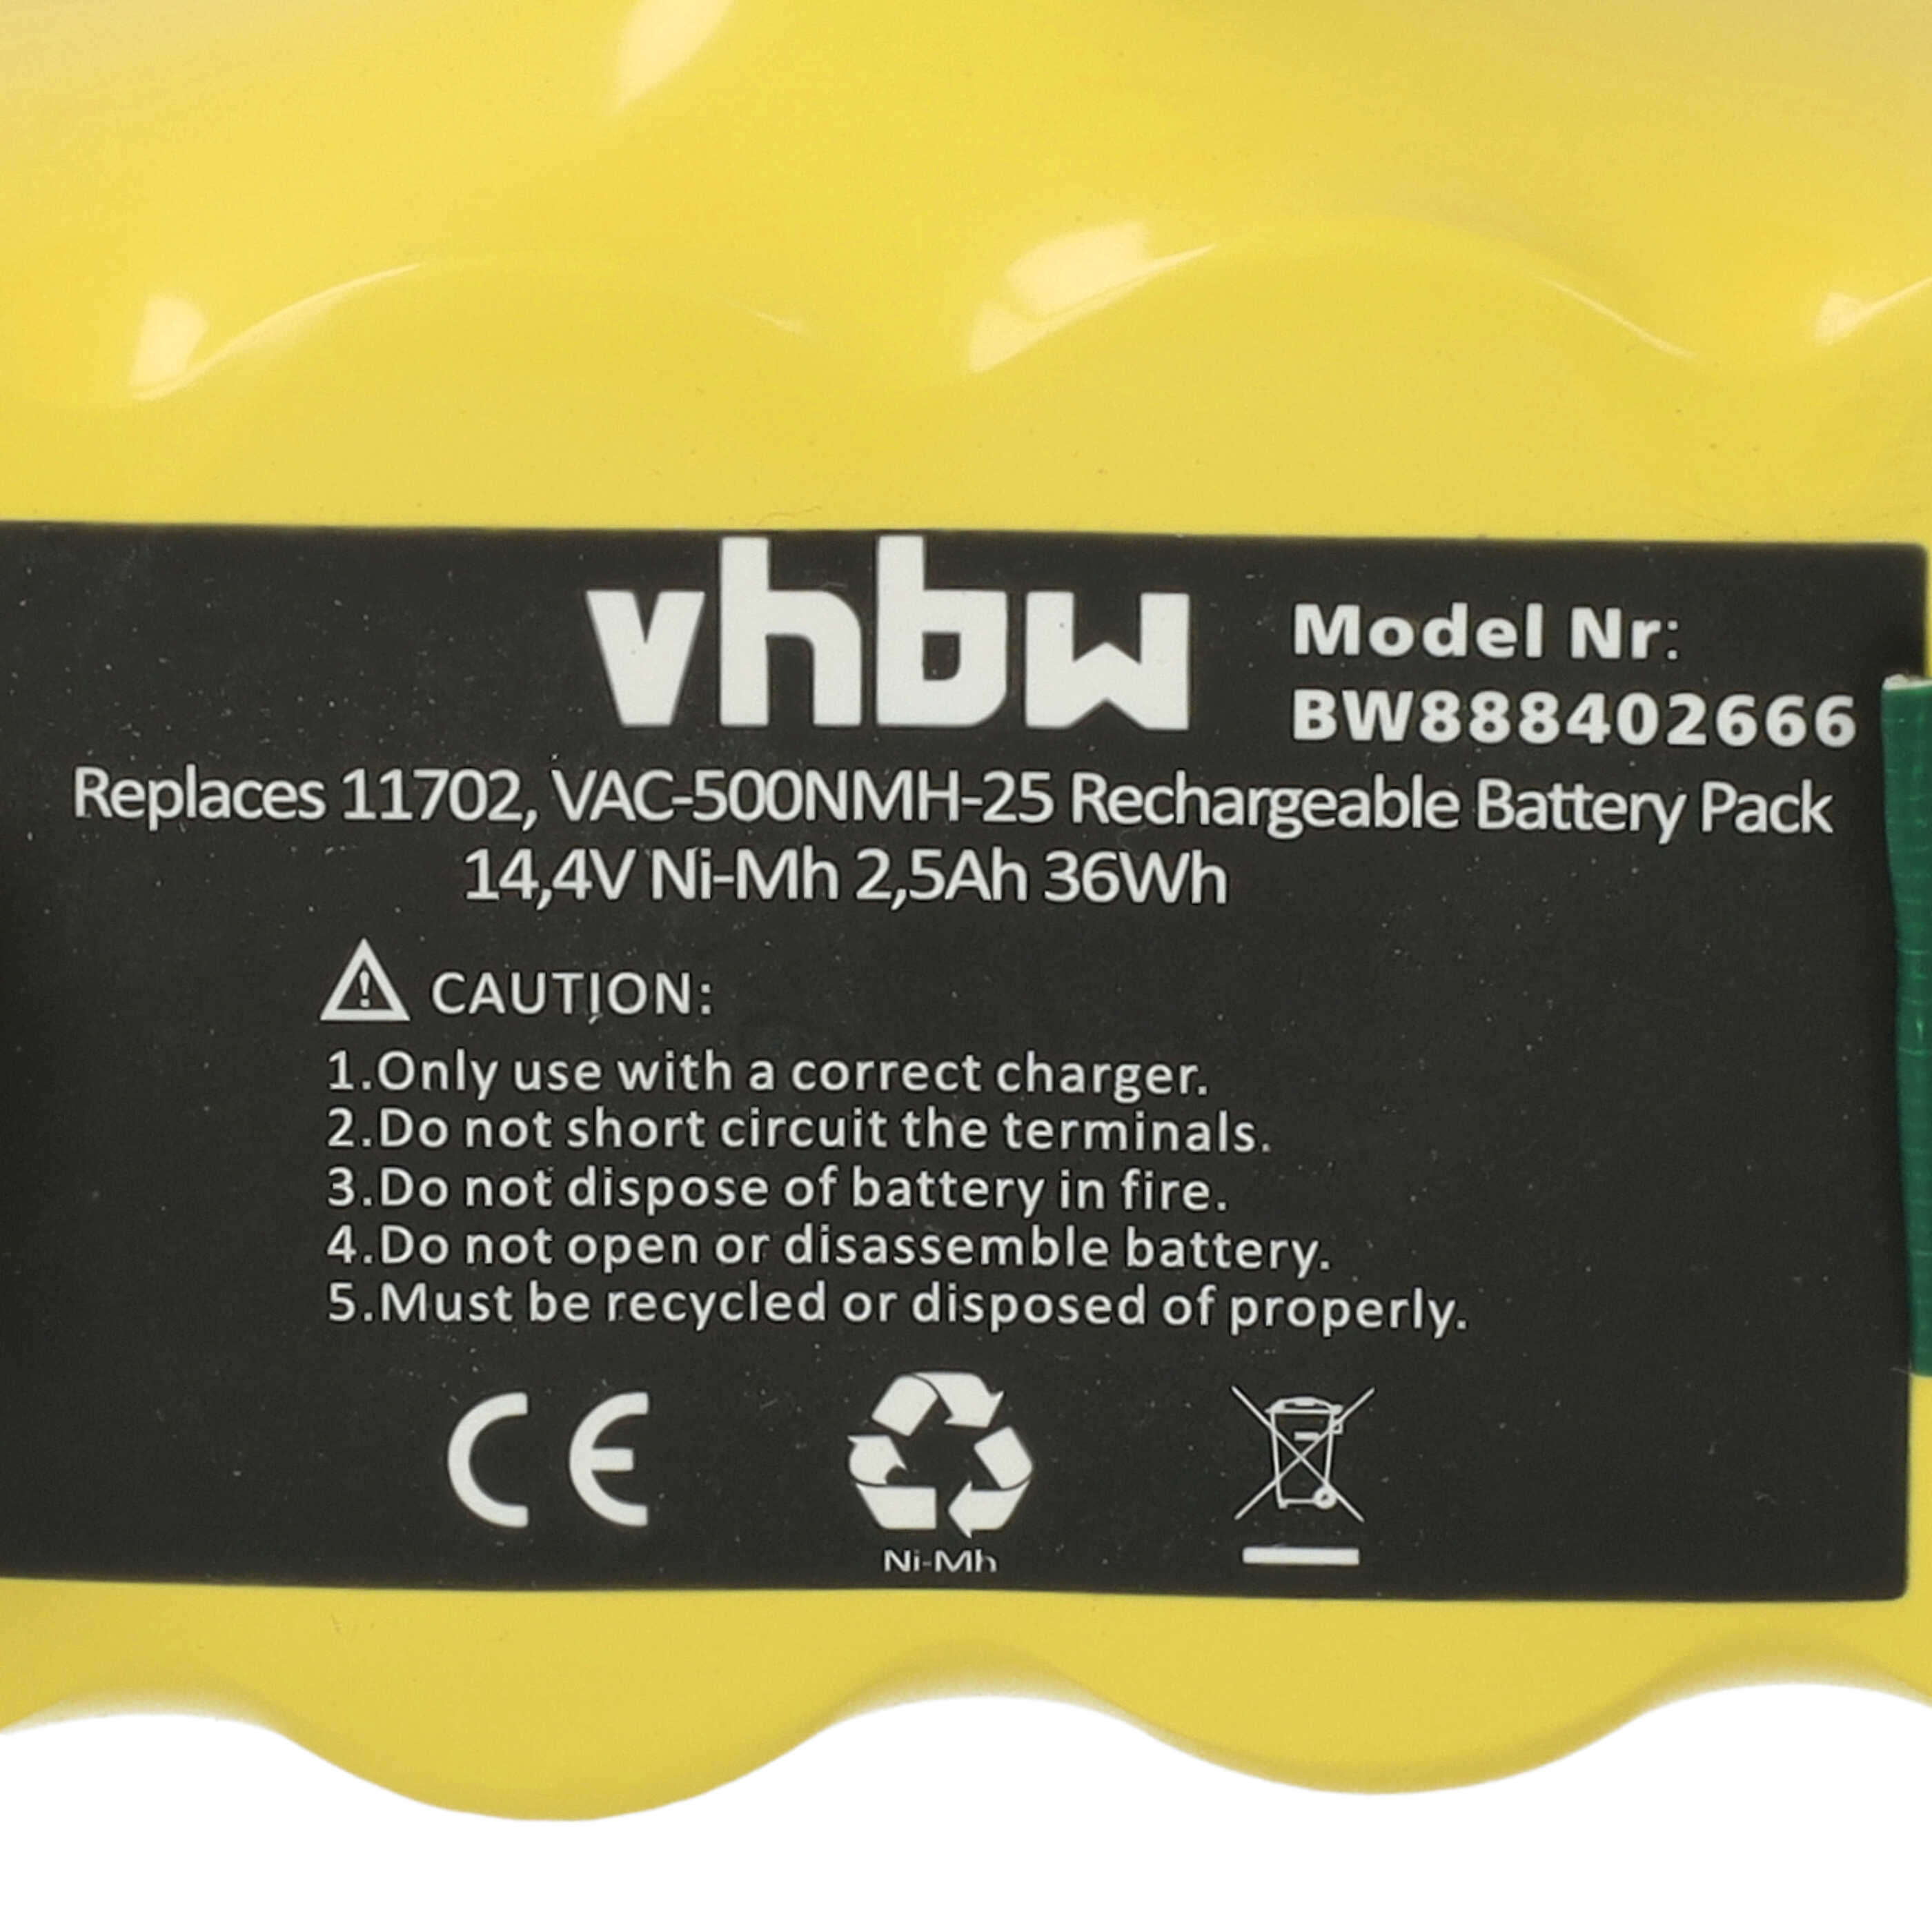 Battery Replacement for 80501e, 80601, 11702, 68939, 80501, 855714, 4419696 for - 2500mAh, 14.4V, NiMH